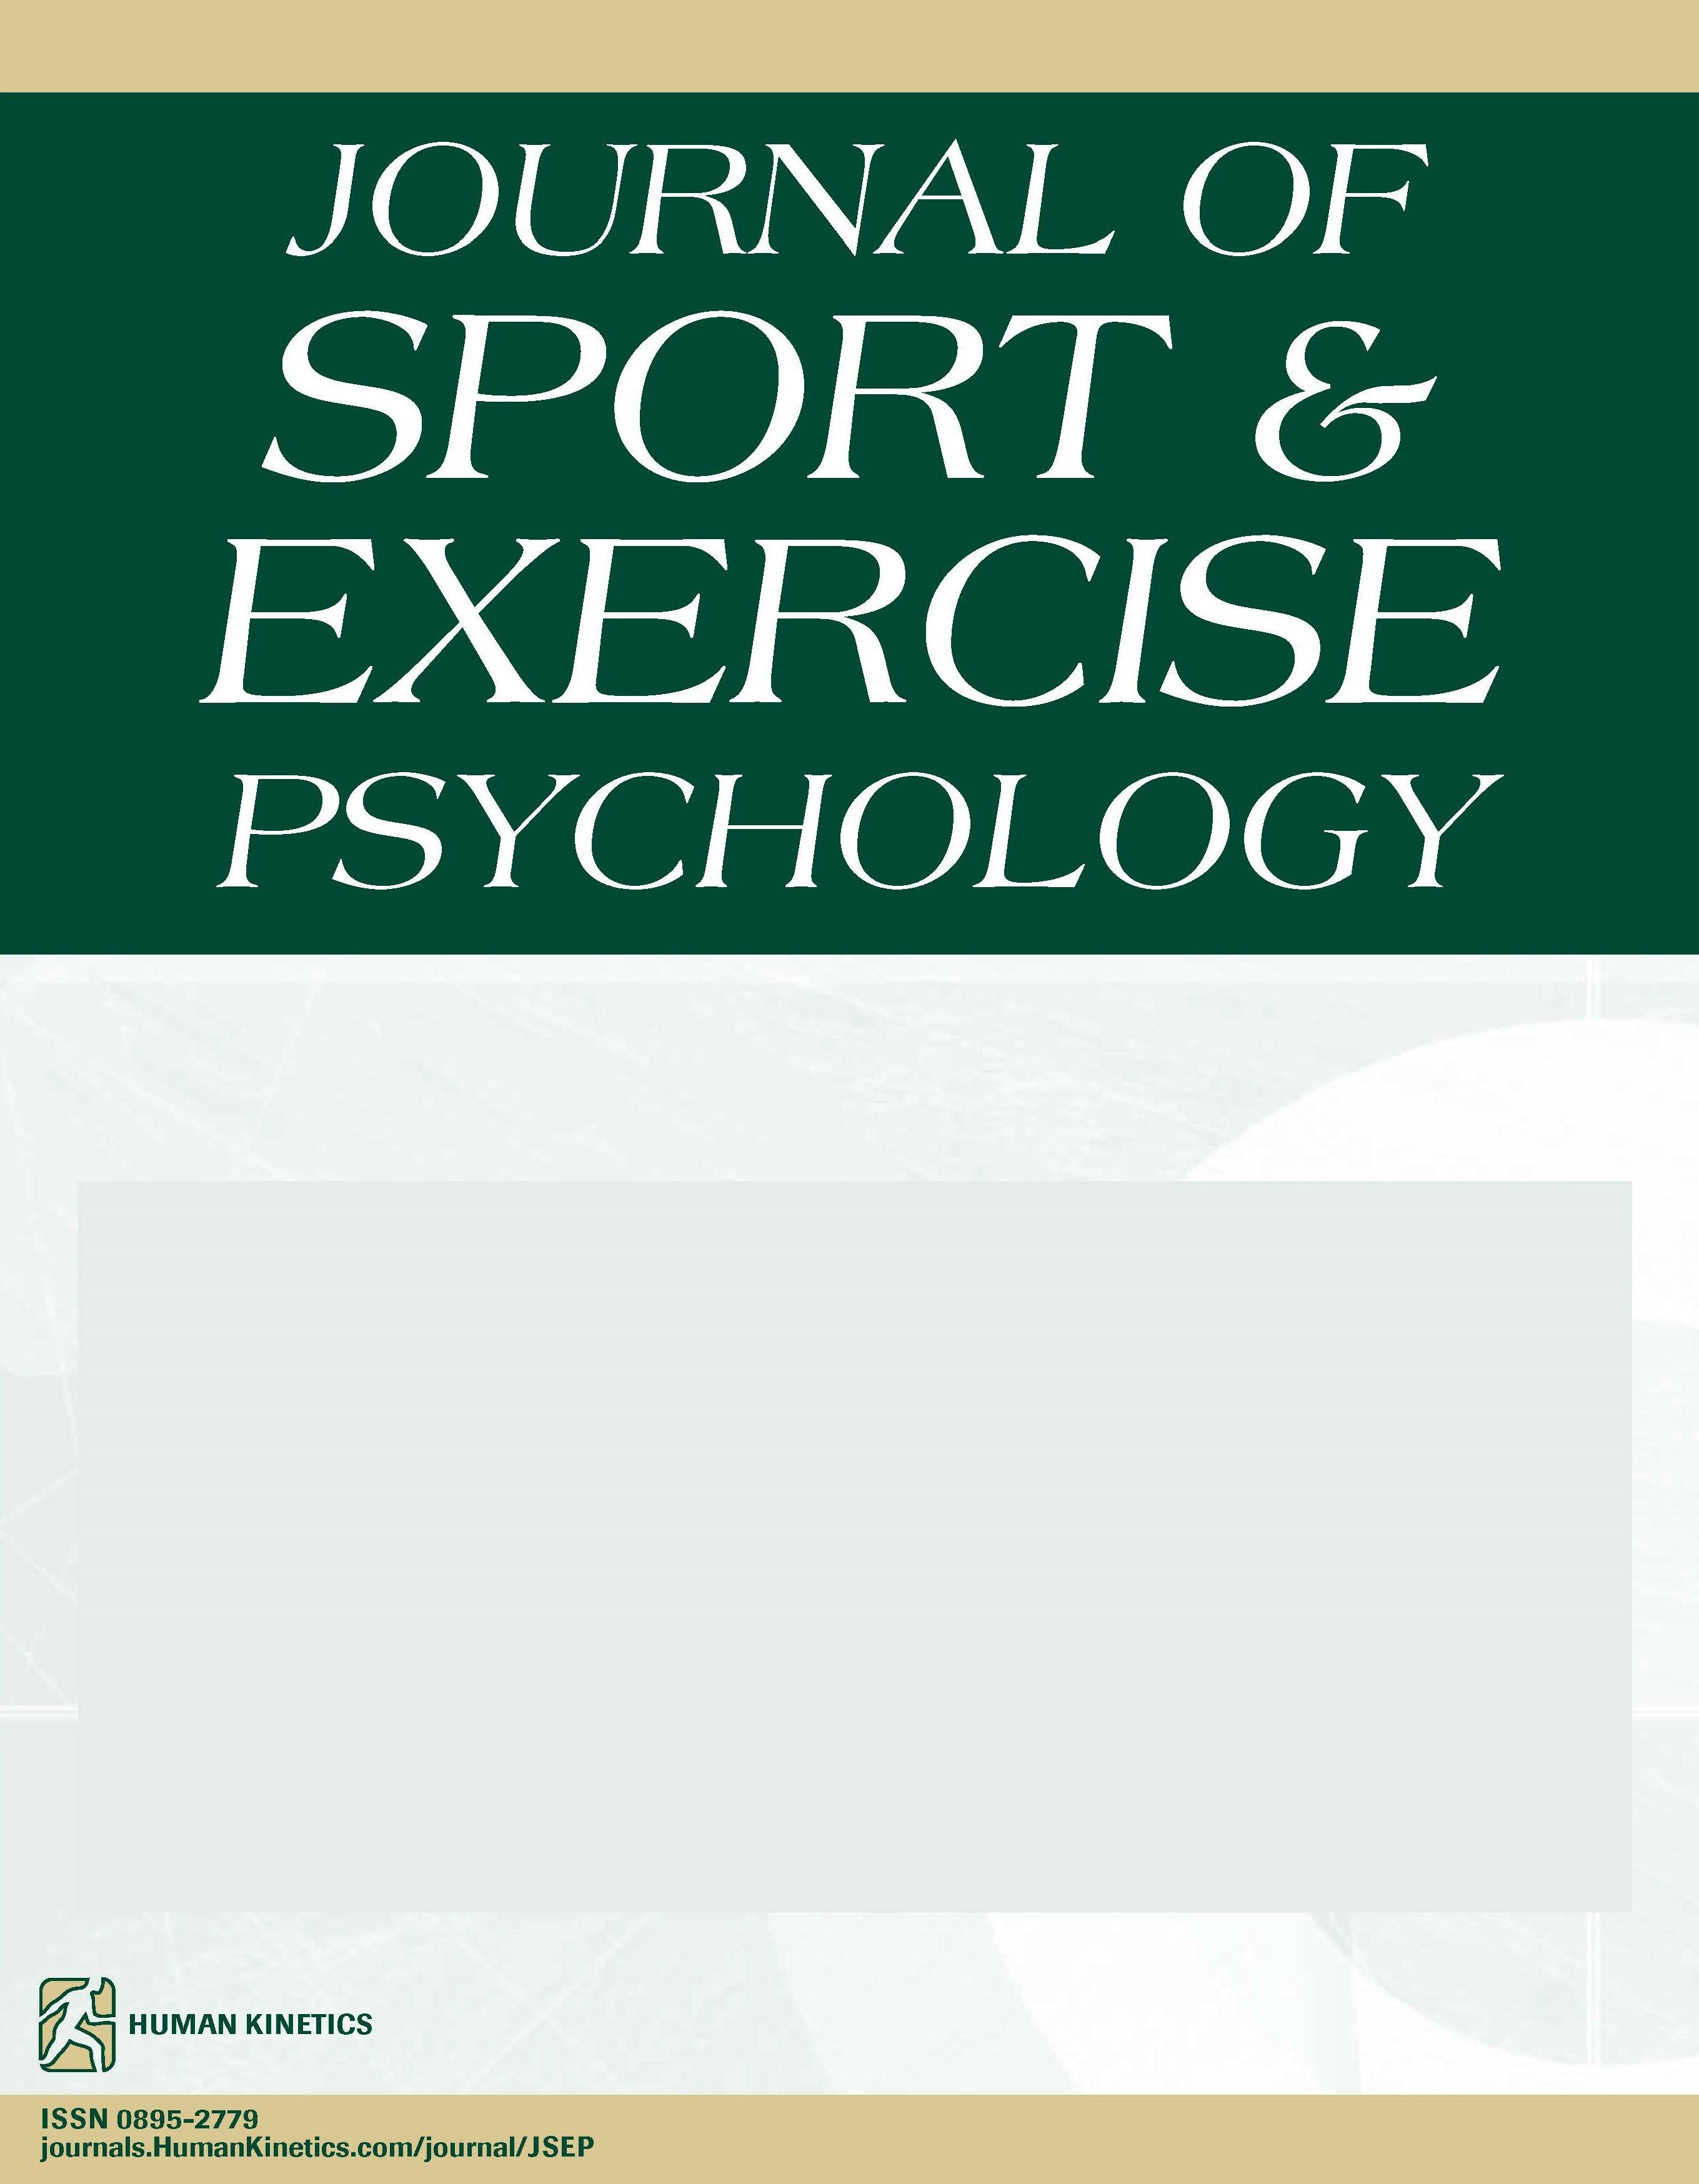 An Examination of the Challenge/Threat State and Sport-Performance Relationship While Controlling for Past Performance